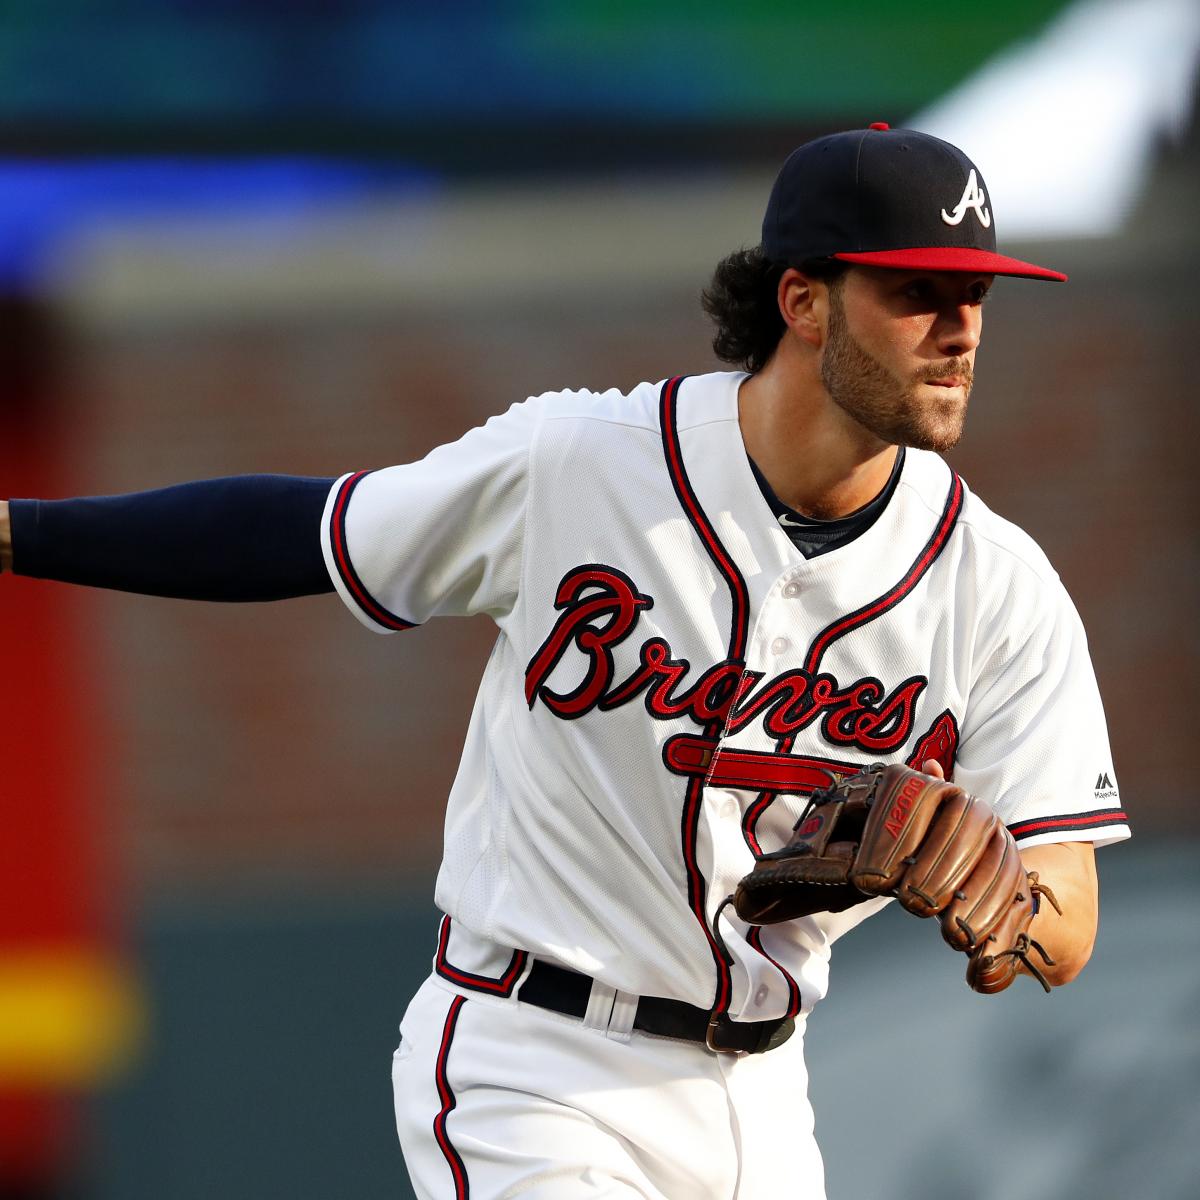 Thank Dansby Swanson, not us. 😉 @braves